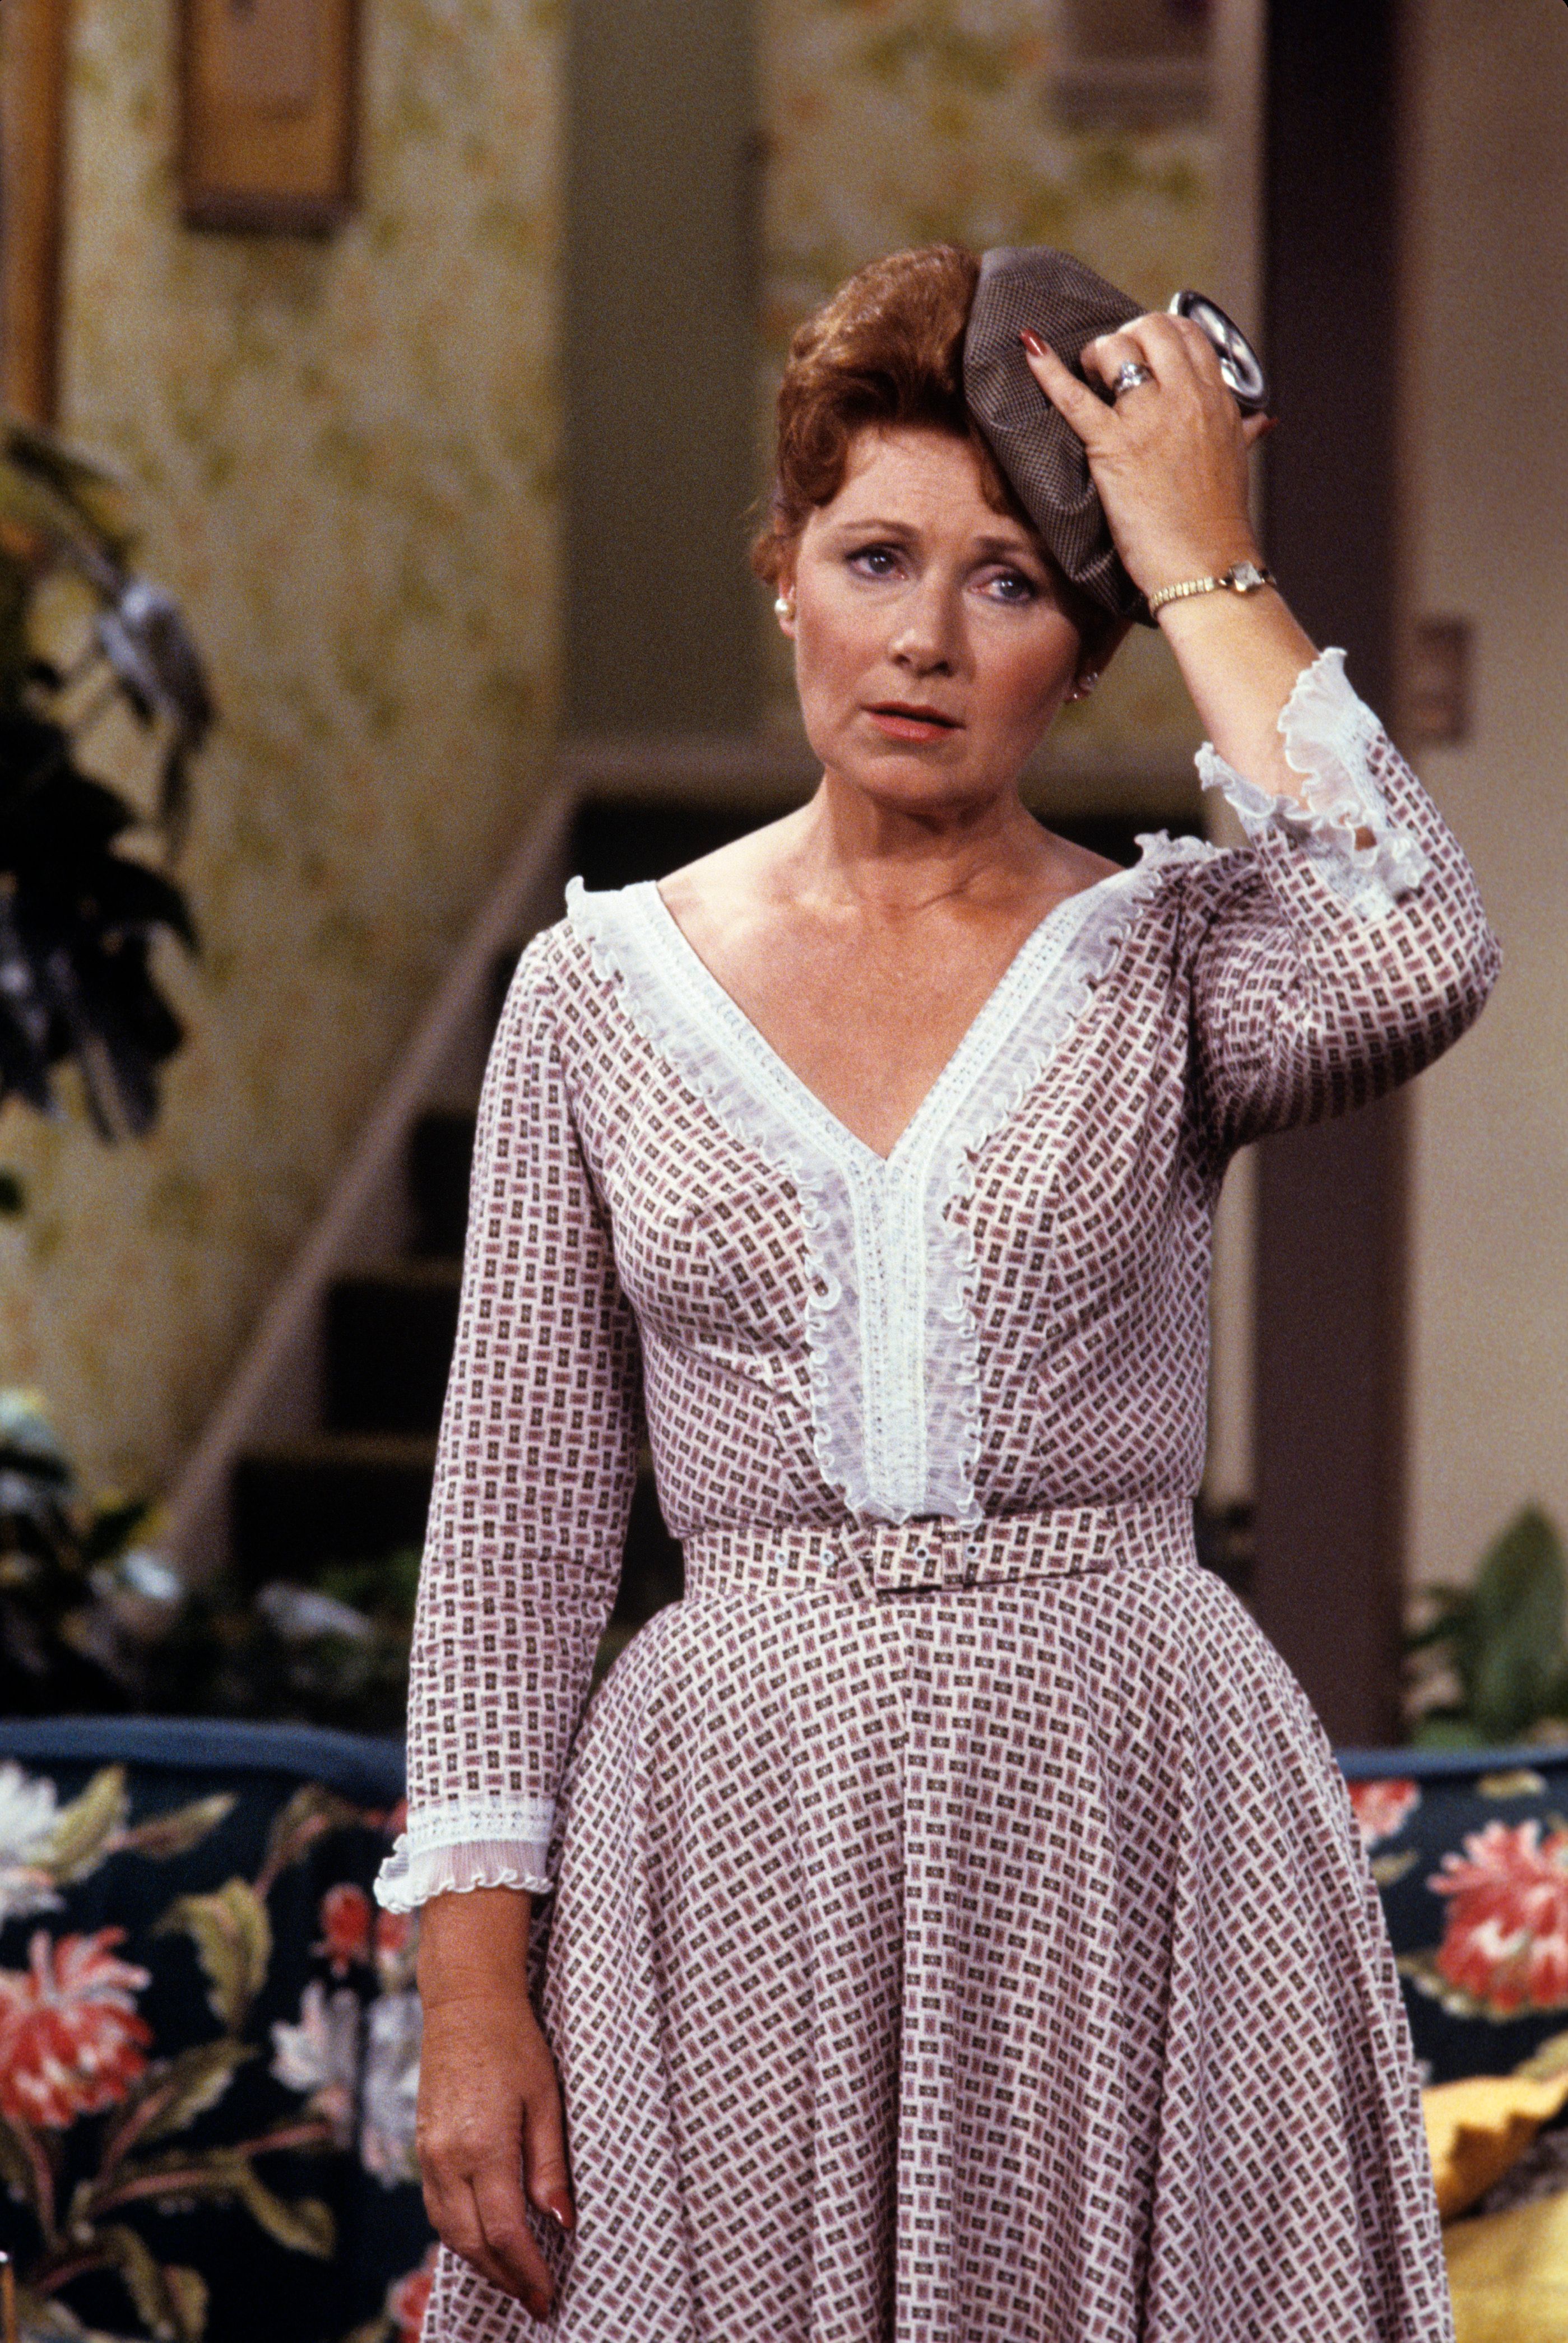 Actress Marion Ross during an episode of "Happy Days" on January 15, 1980. | Source: Getty Images